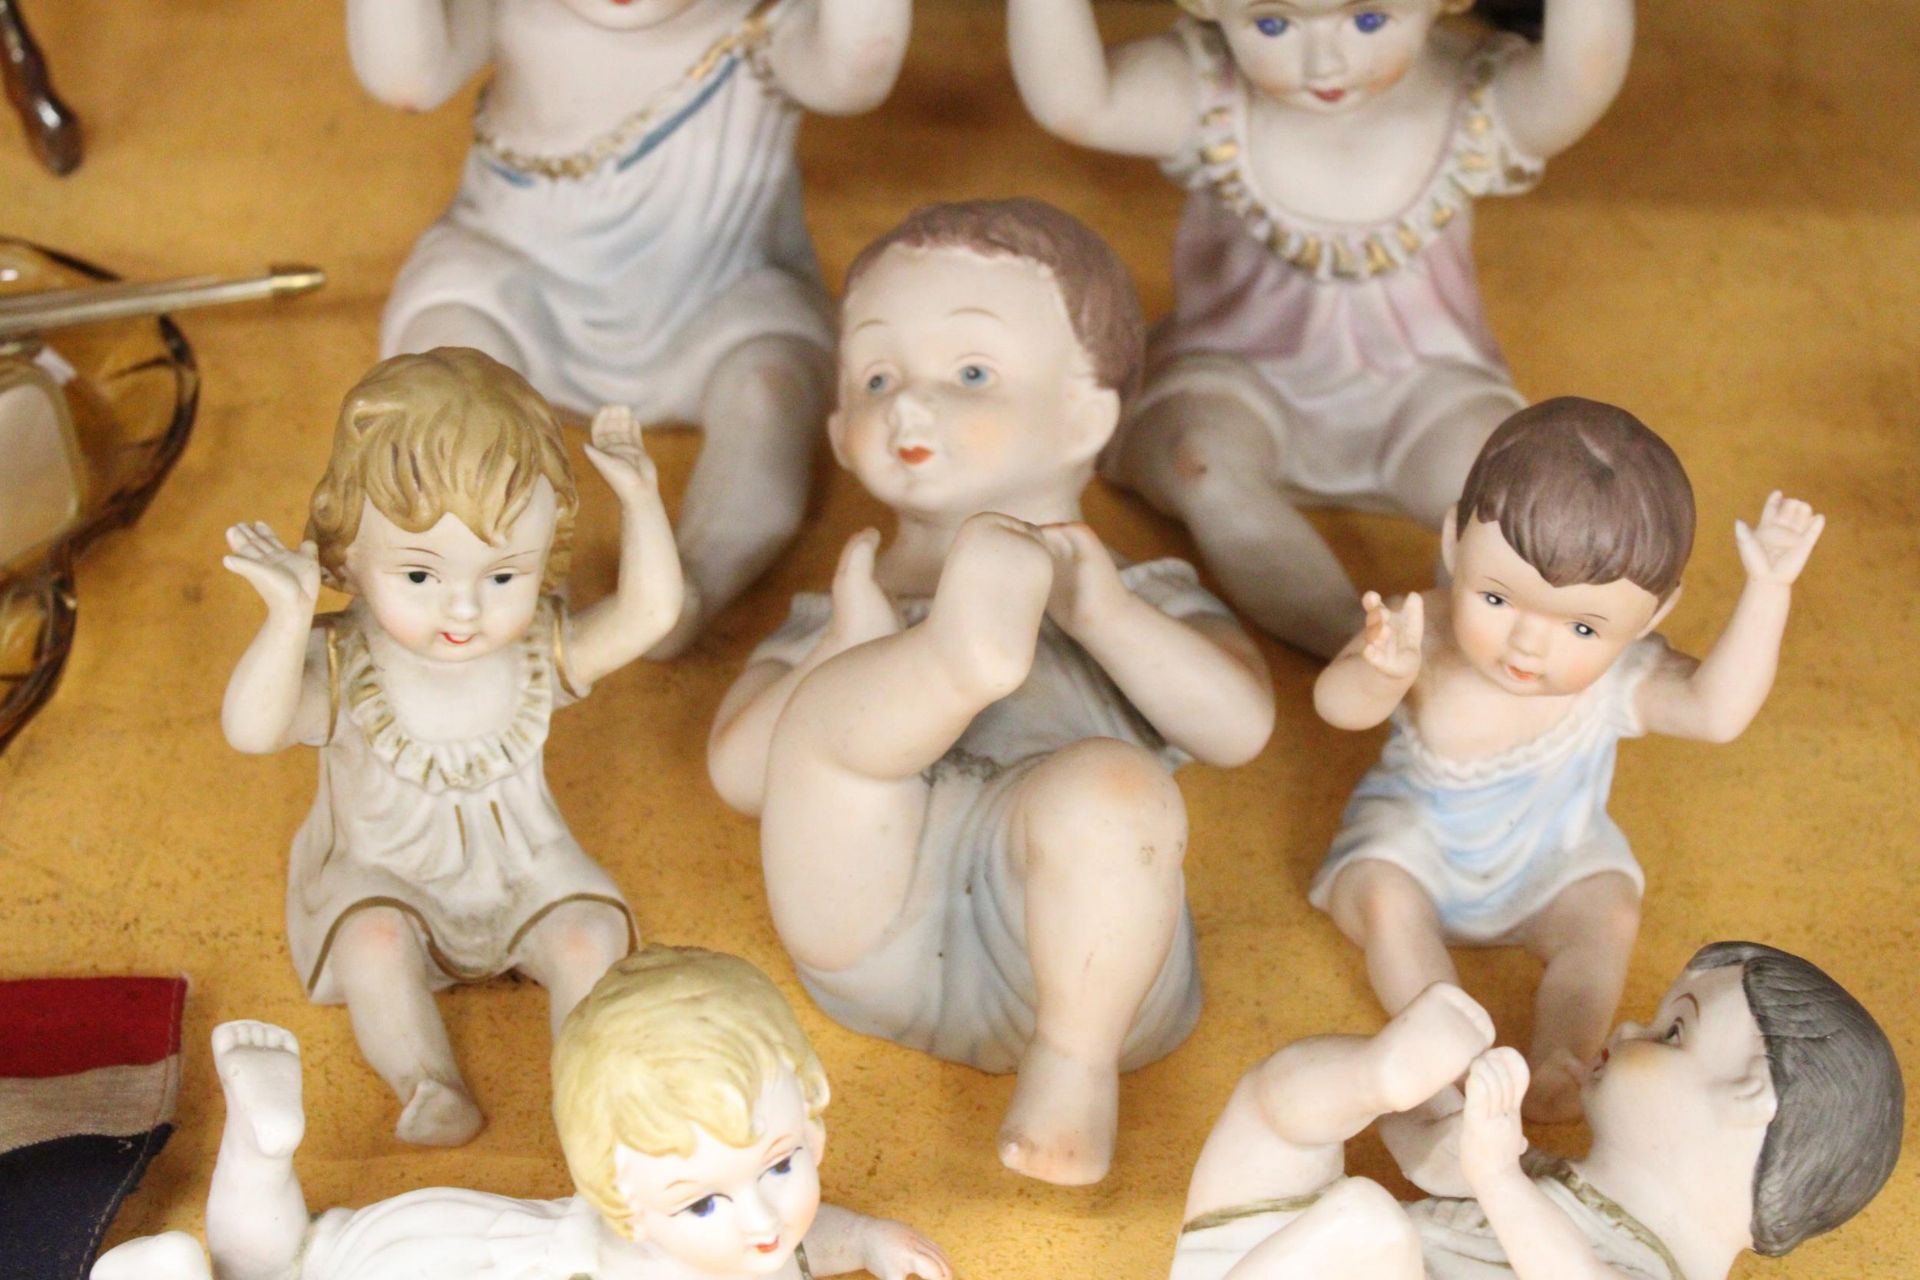 THREE LARGE AND FOUR SMALL ANTIQUE PORCELAIN, BISQUE DOLLS - Image 3 of 5